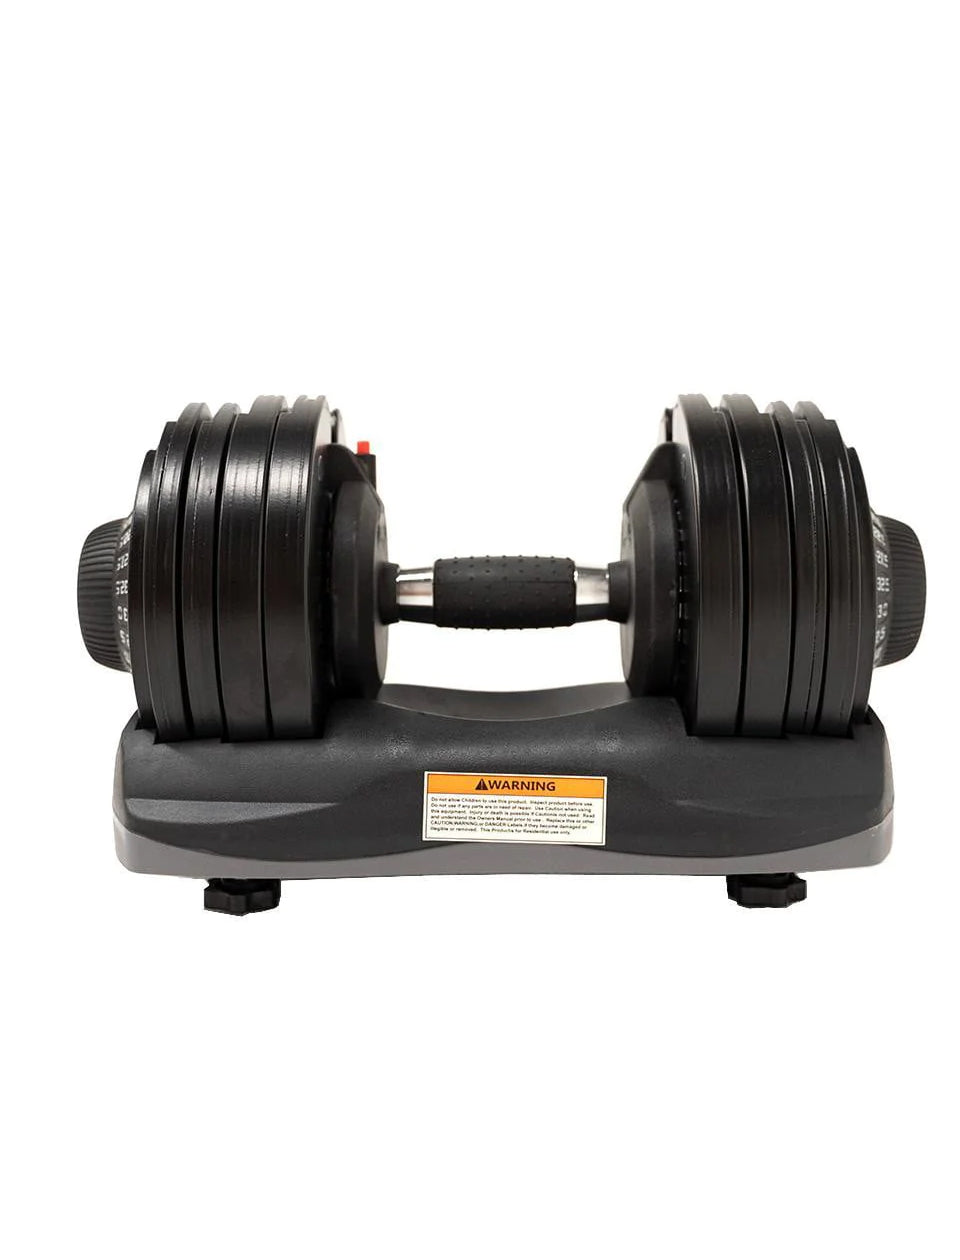 FORCE USA DialTech Elite 32.5kg Adjustable Dumbbell Pair With Stand